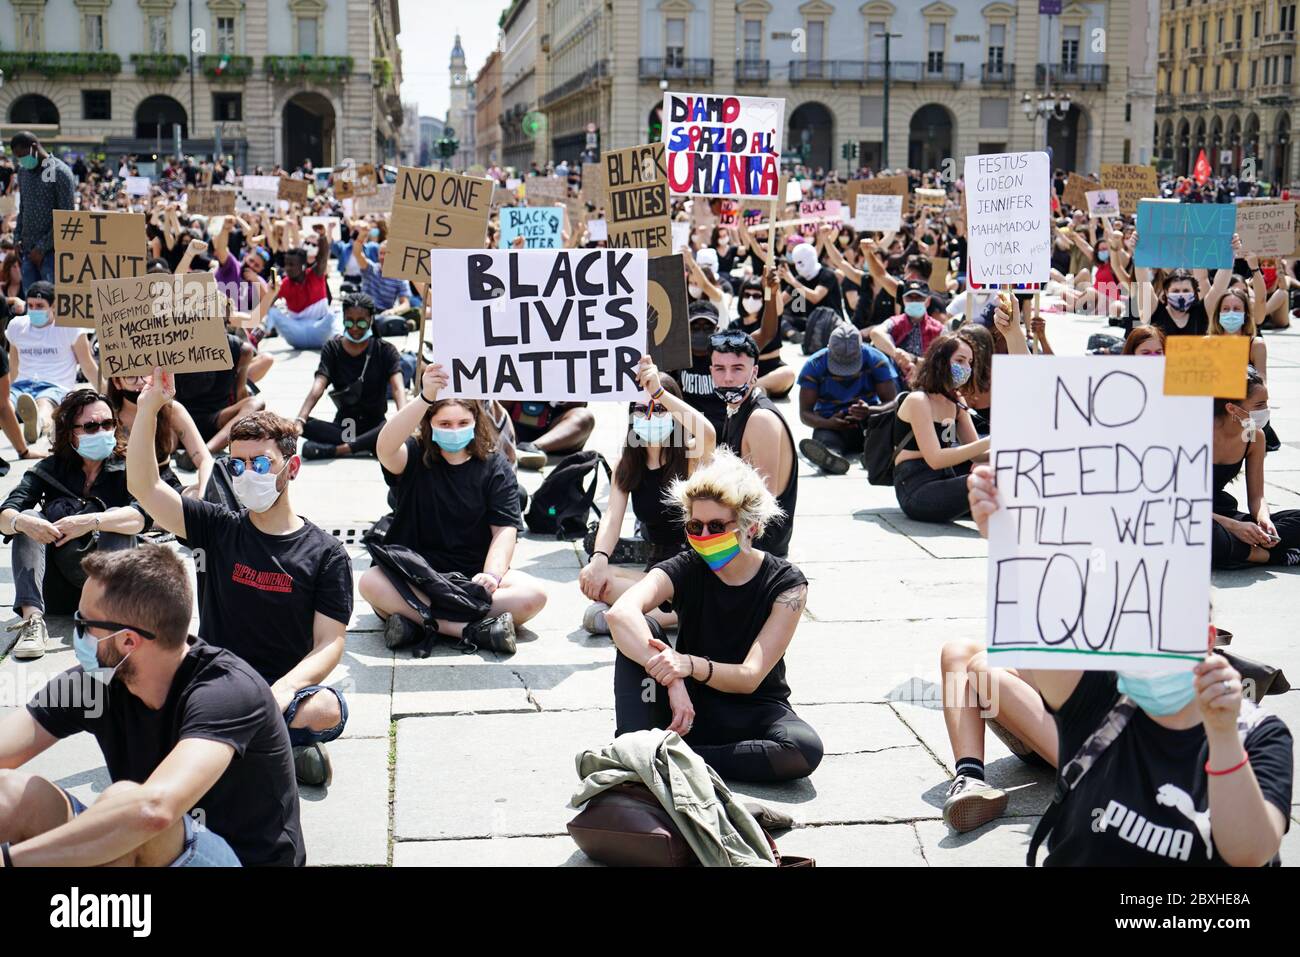 Peaceful protesters demonstrate against the death of George Floyd and all racial discrimination. Turin, Italy - June 2020 Stock Photo